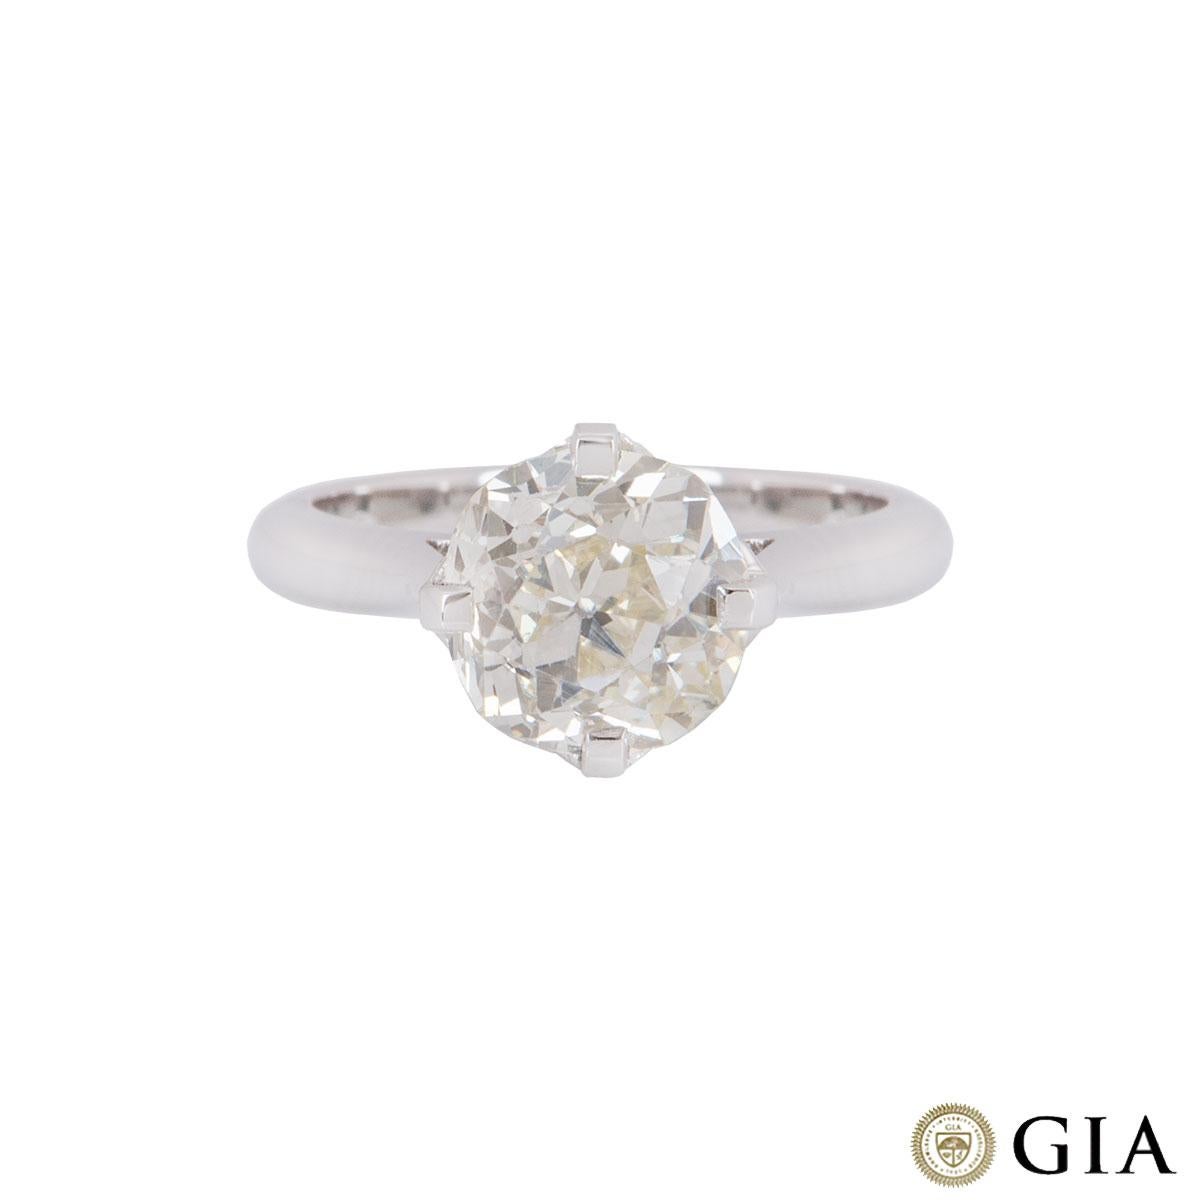 A stunning platinum old mine cut diamond ring. The ring is set to the centre with a 2.71ct old mine brilliant cut diamond of which is U to V range in colour and VS2 clarity. The diamond is set within a bespoke platinum 4 claw setting featuring pave